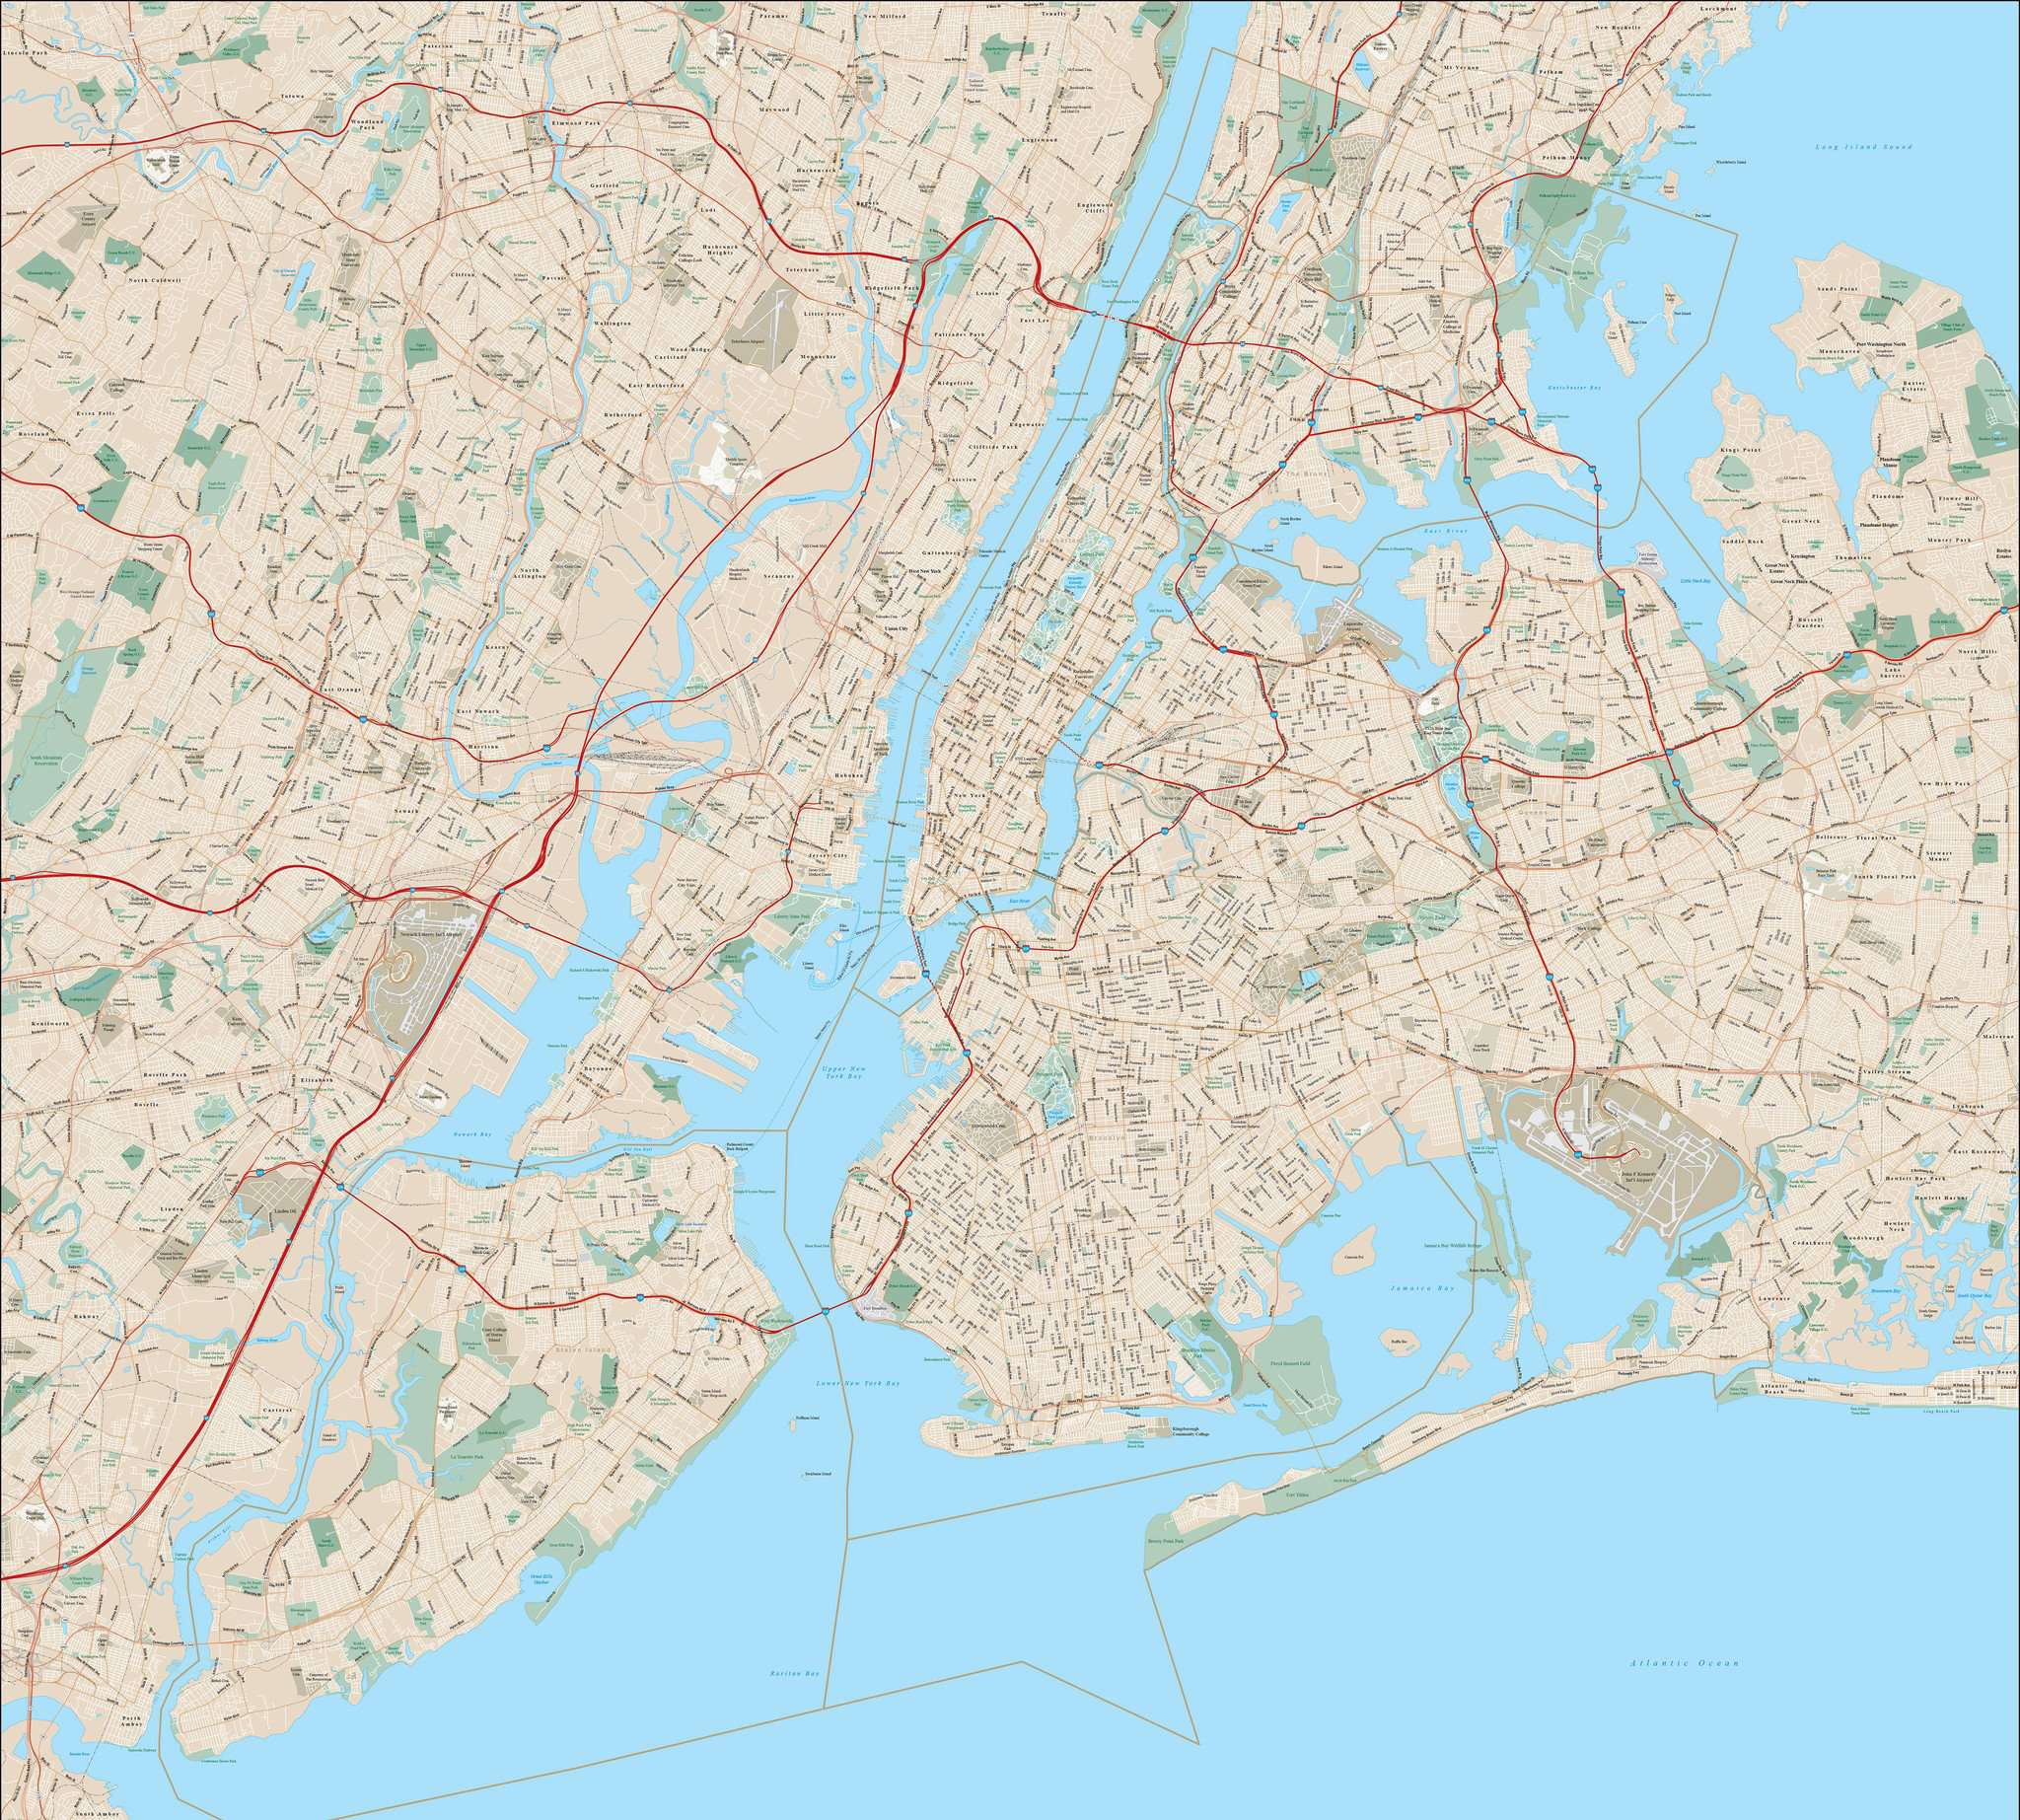 New York City Ny Entire Metro Area With All Local Streets